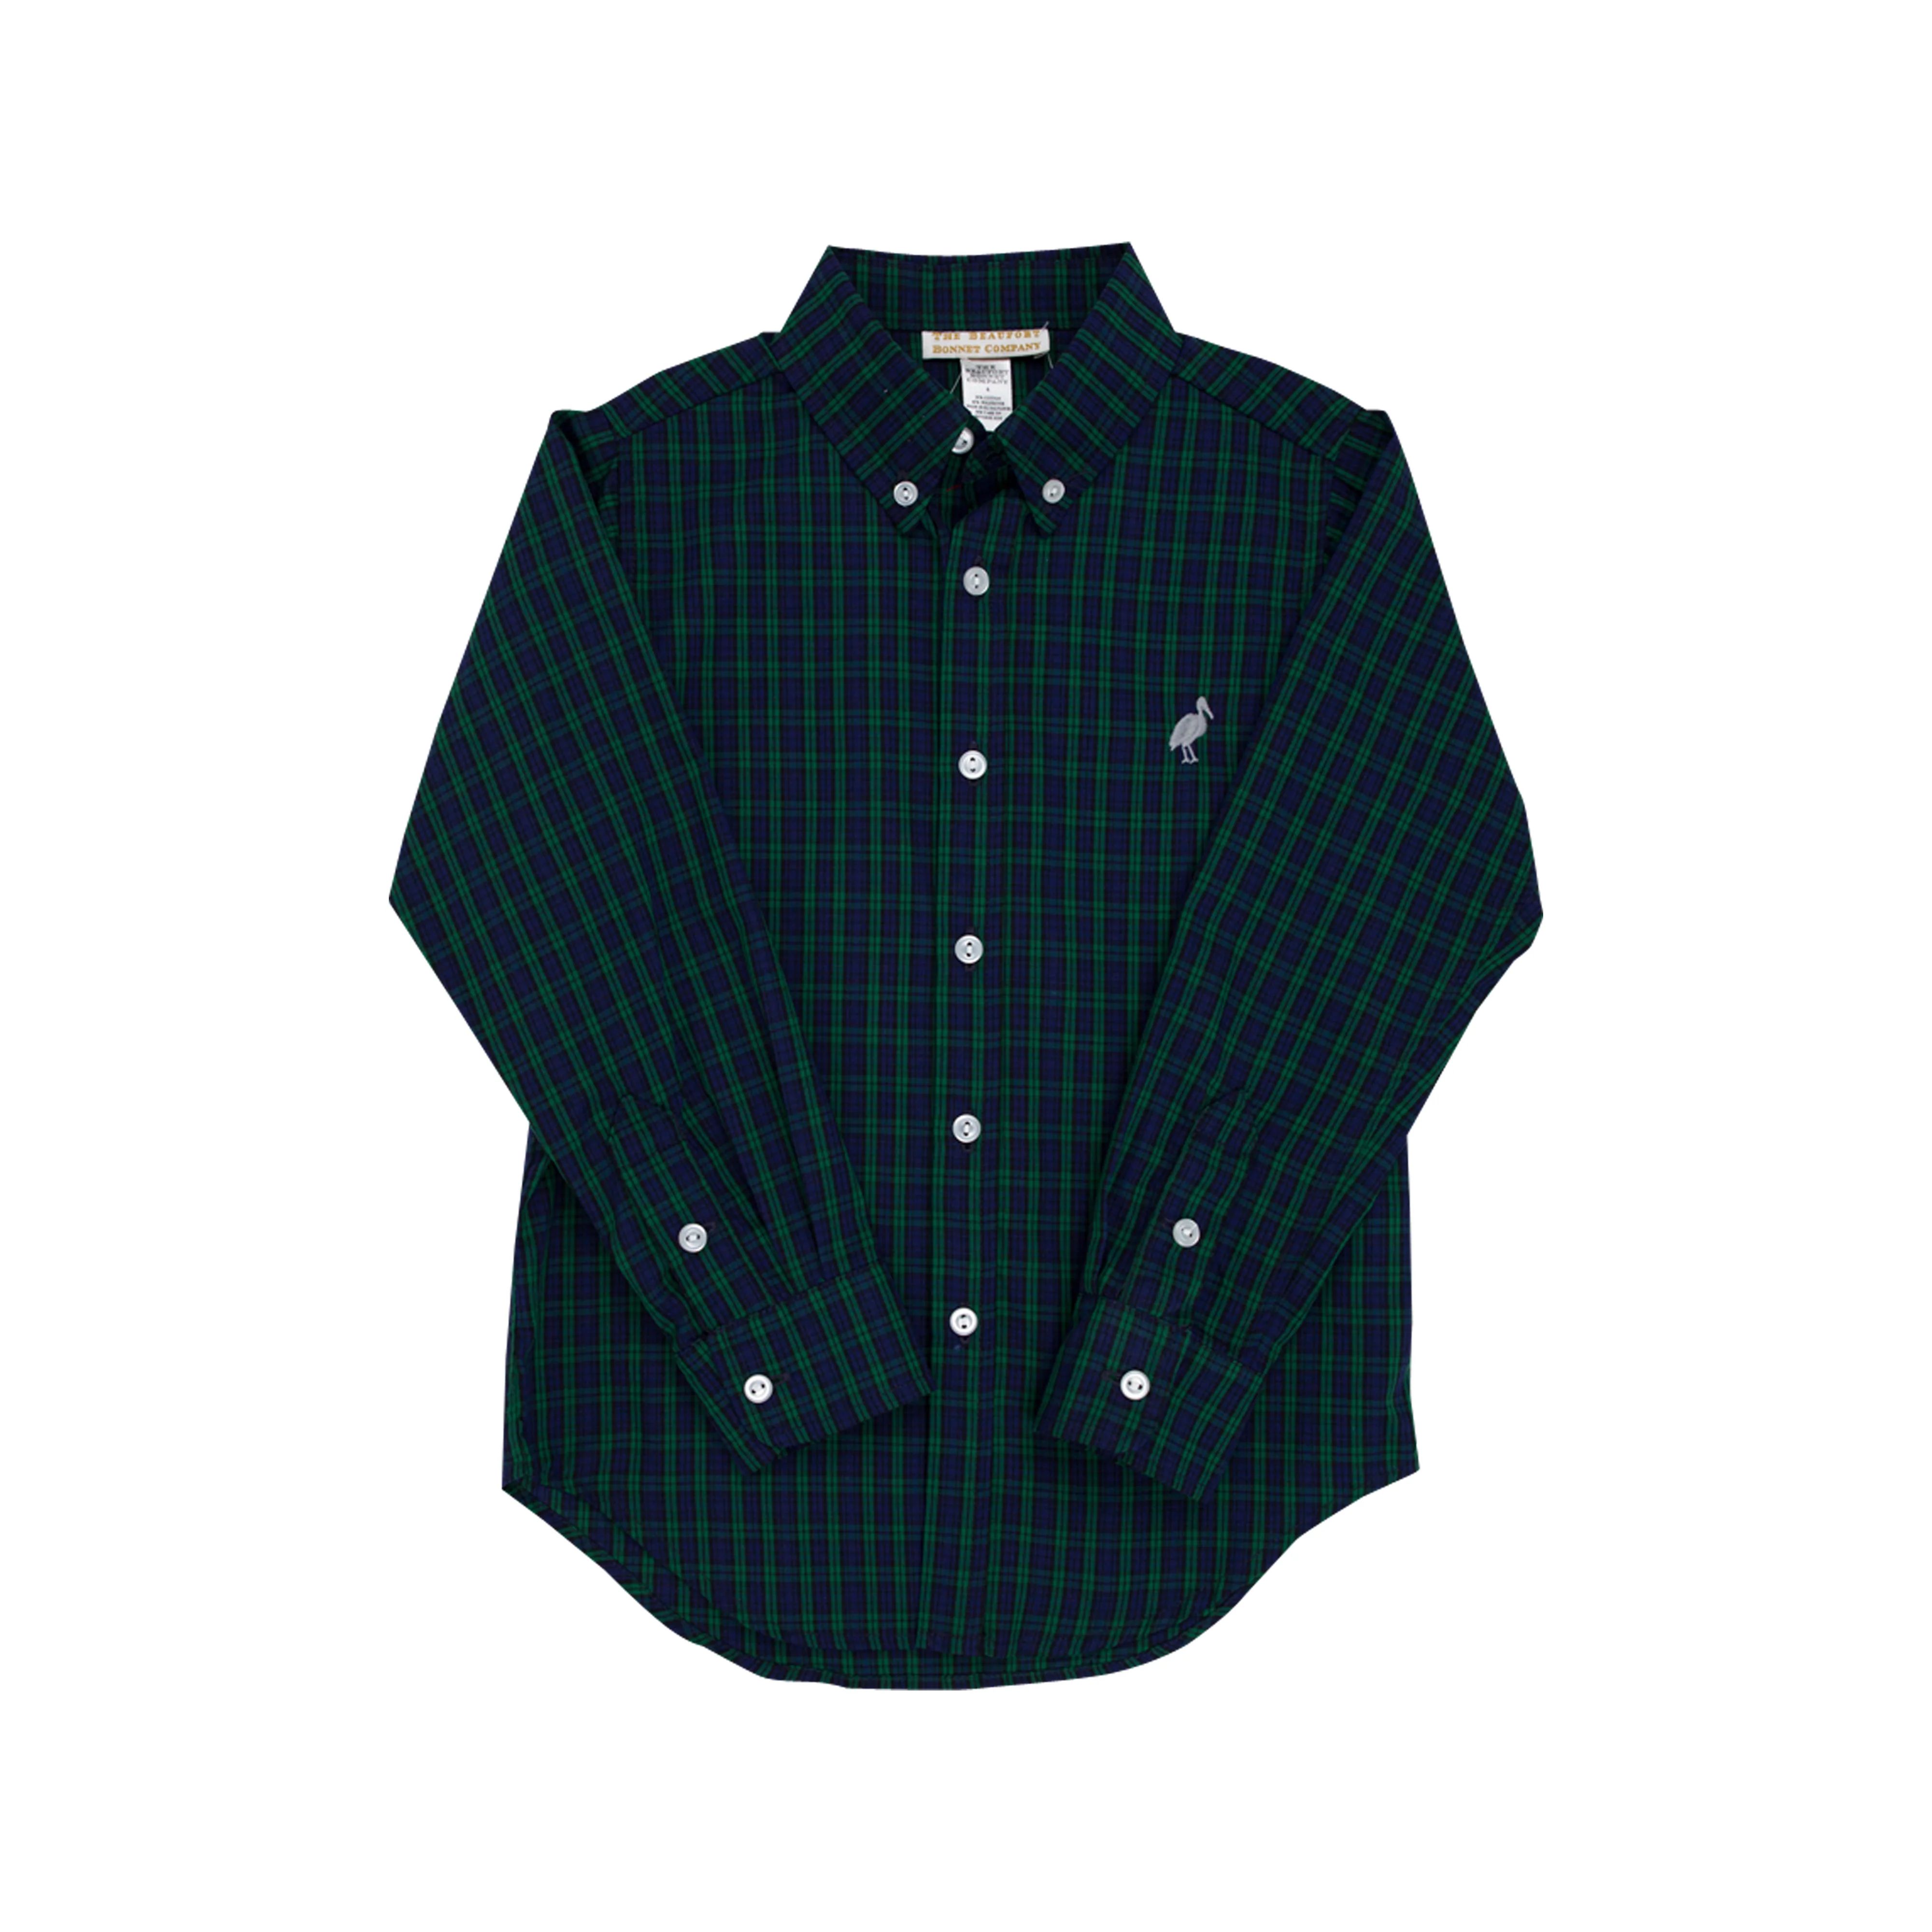 Dean's List Dress Shirt - Fall Party Plaid with Worth Avenue White Stork | The Beaufort Bonnet Company